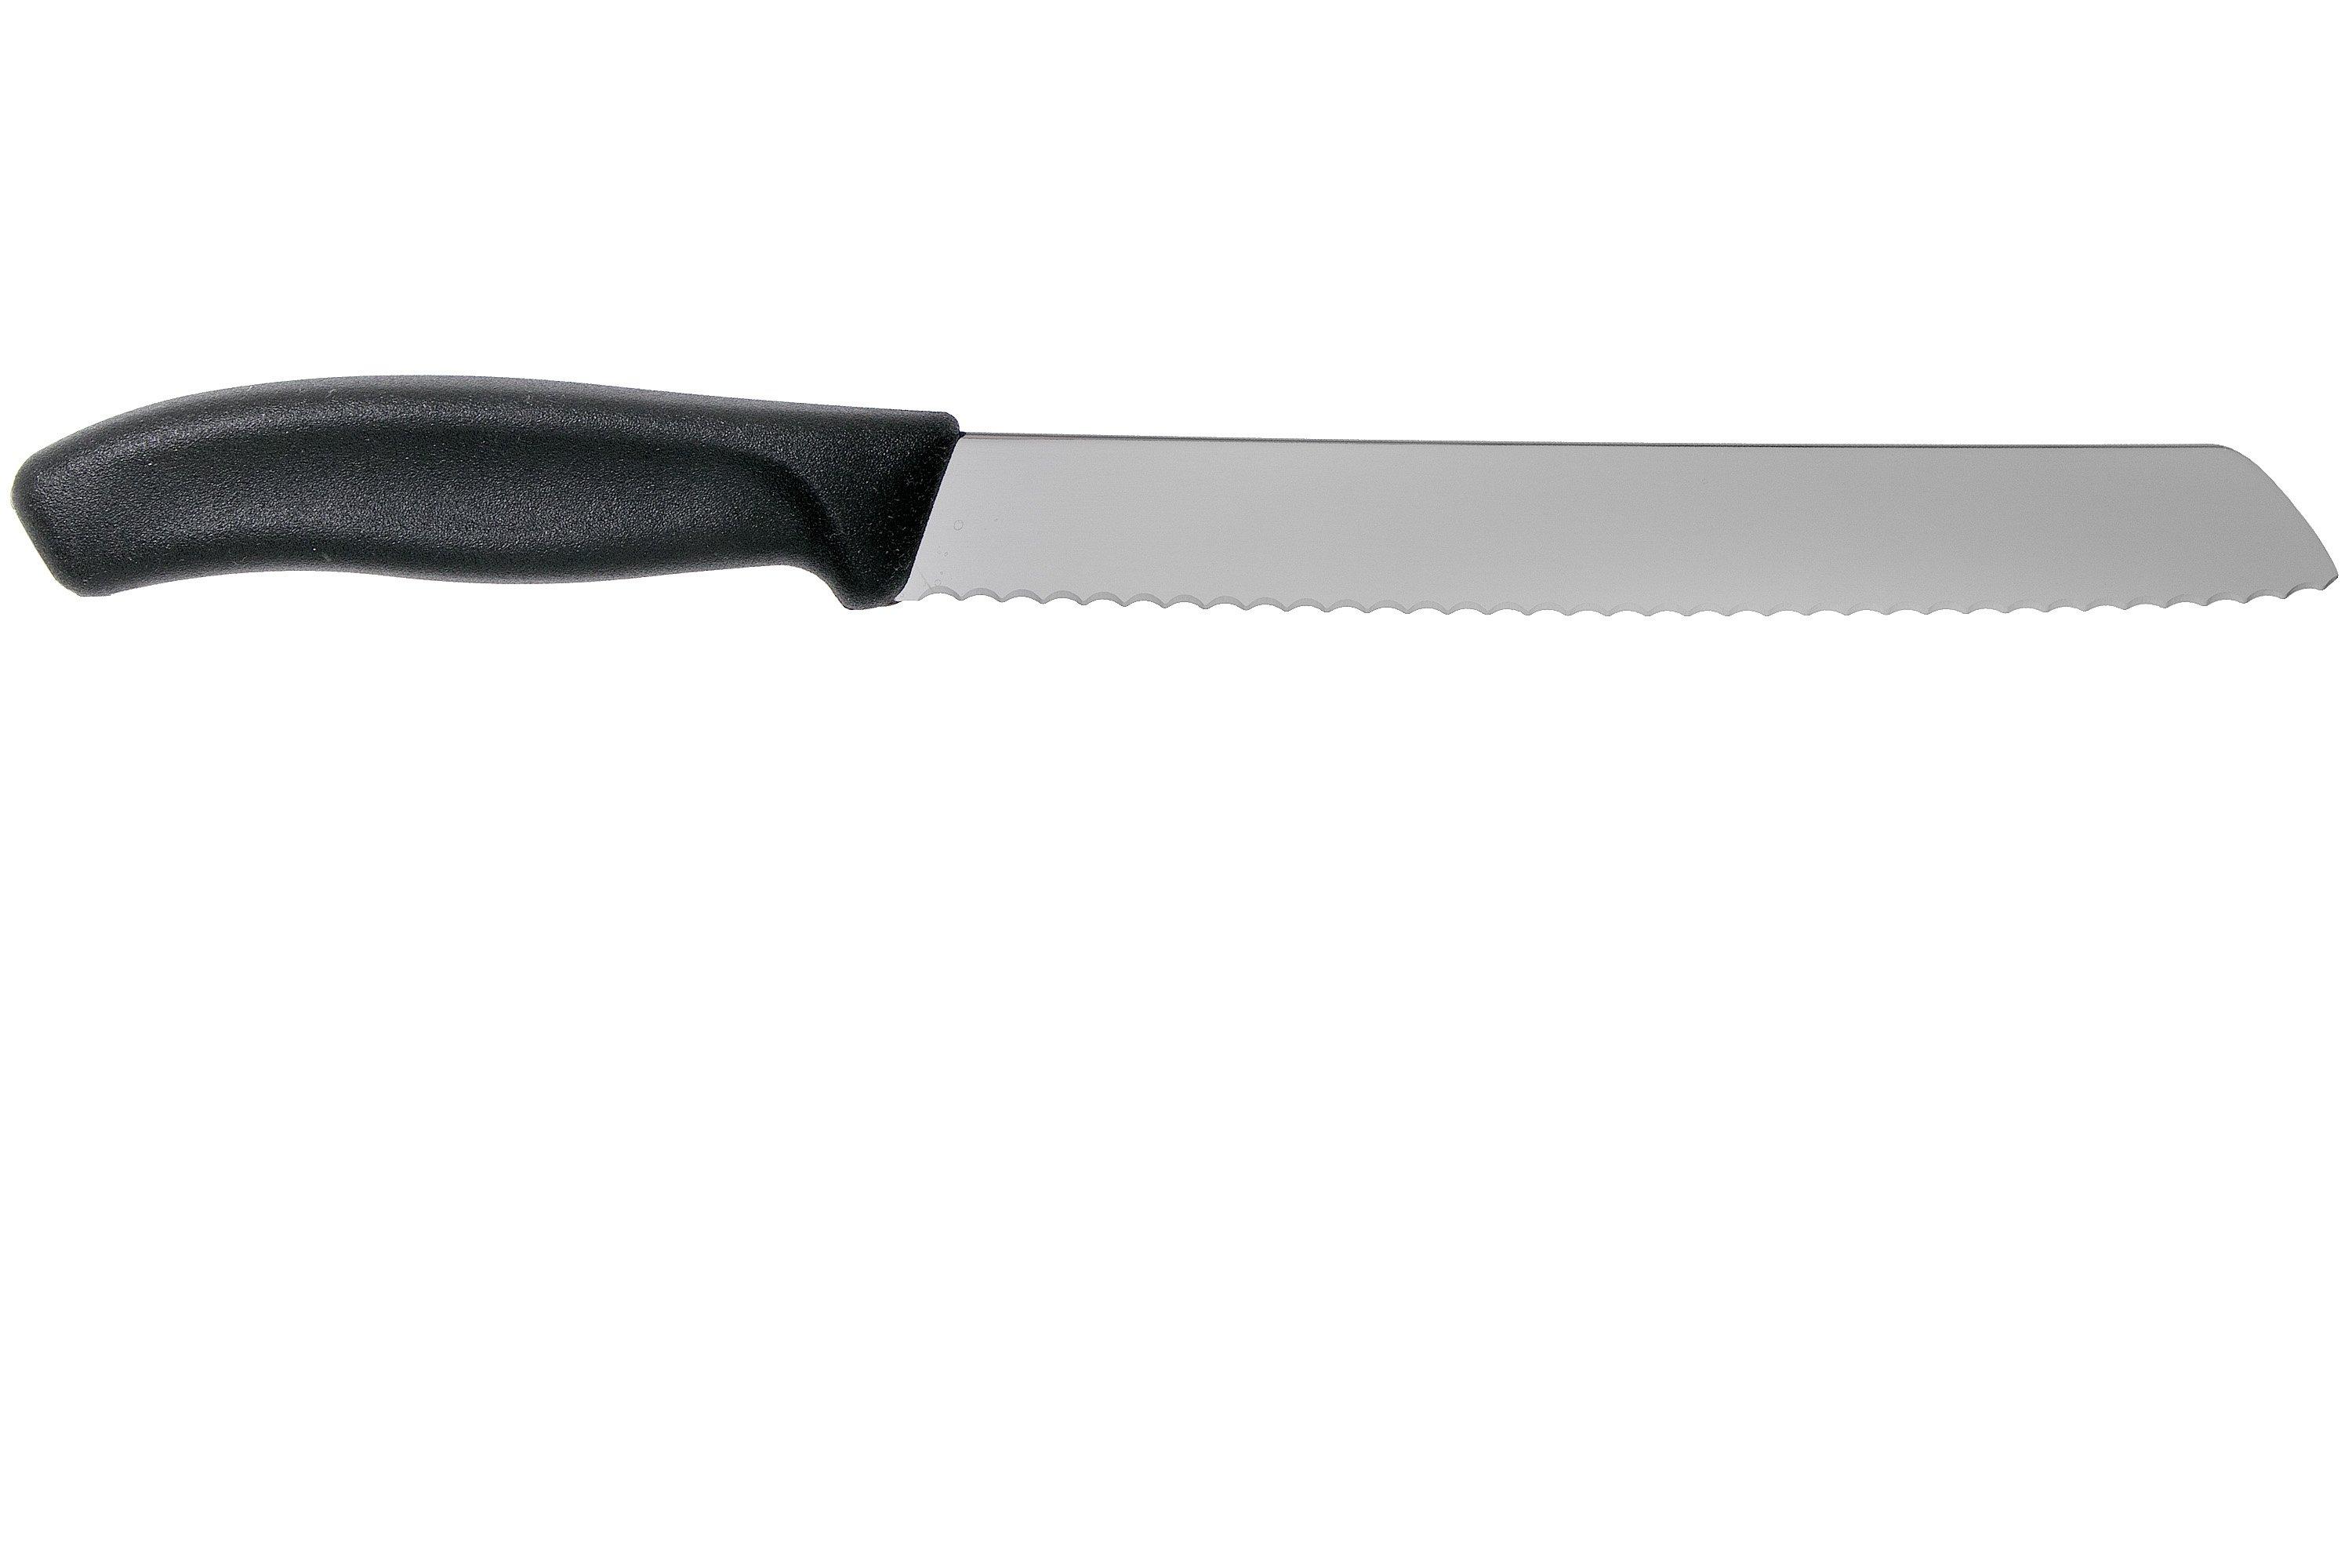 Böker Forge chef's knife 20 cm 03BO501  Advantageously shopping at